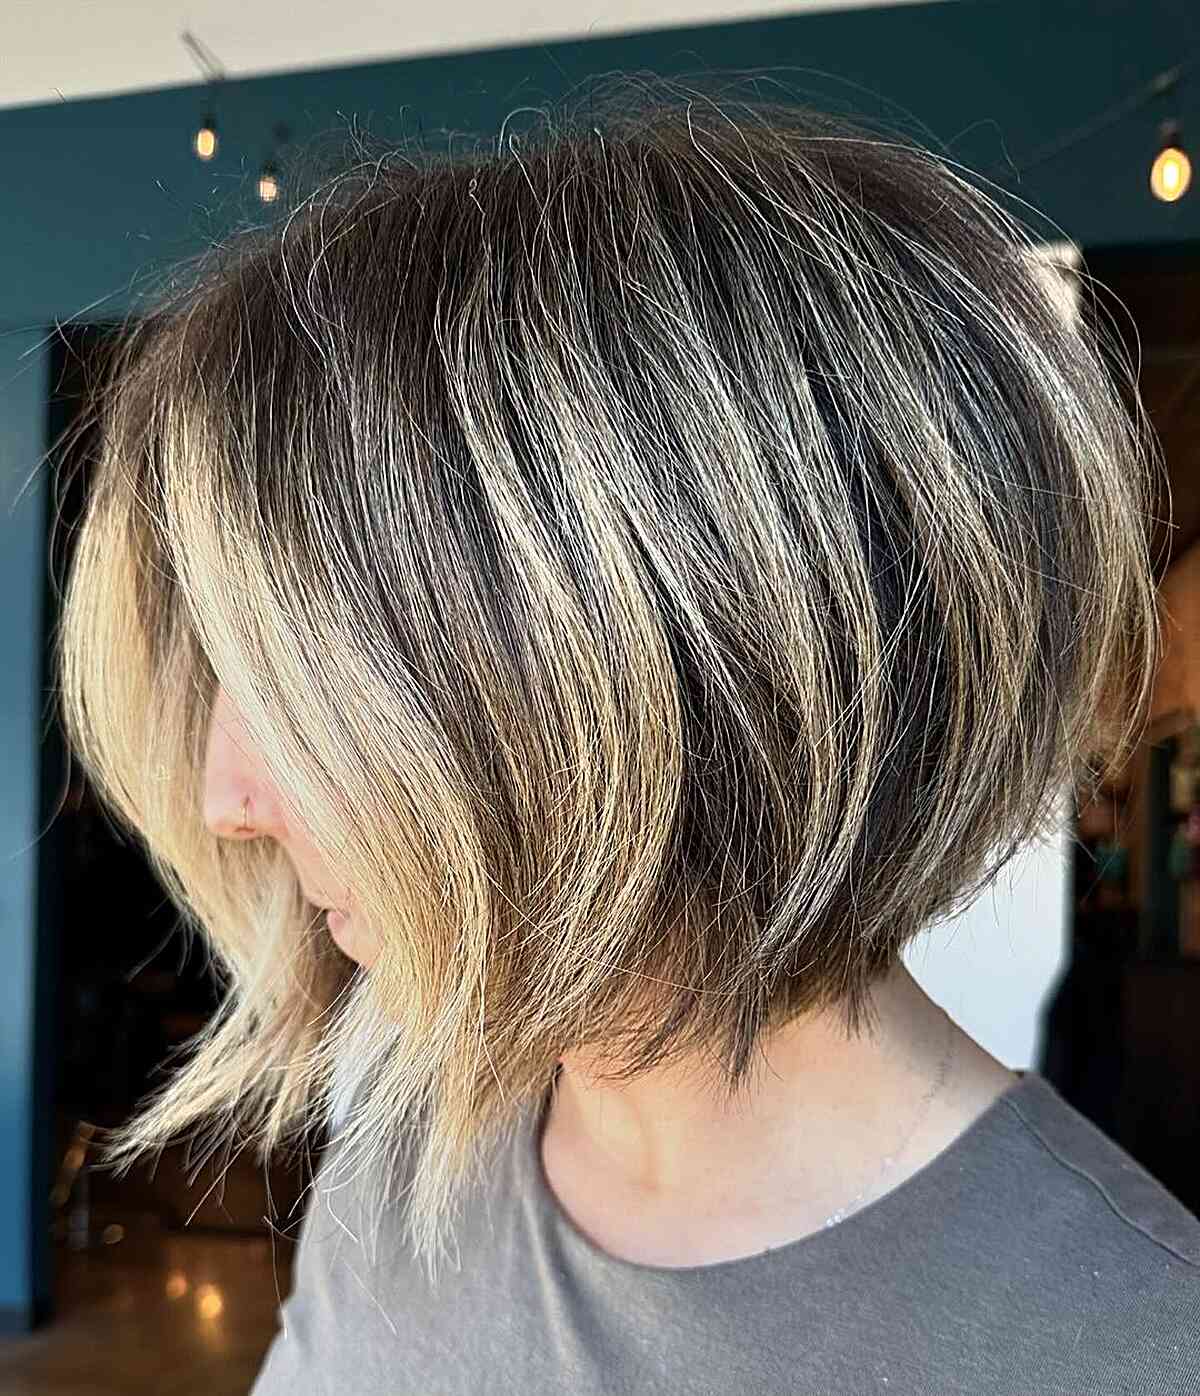 Nape-Length Bob with Visible Layers